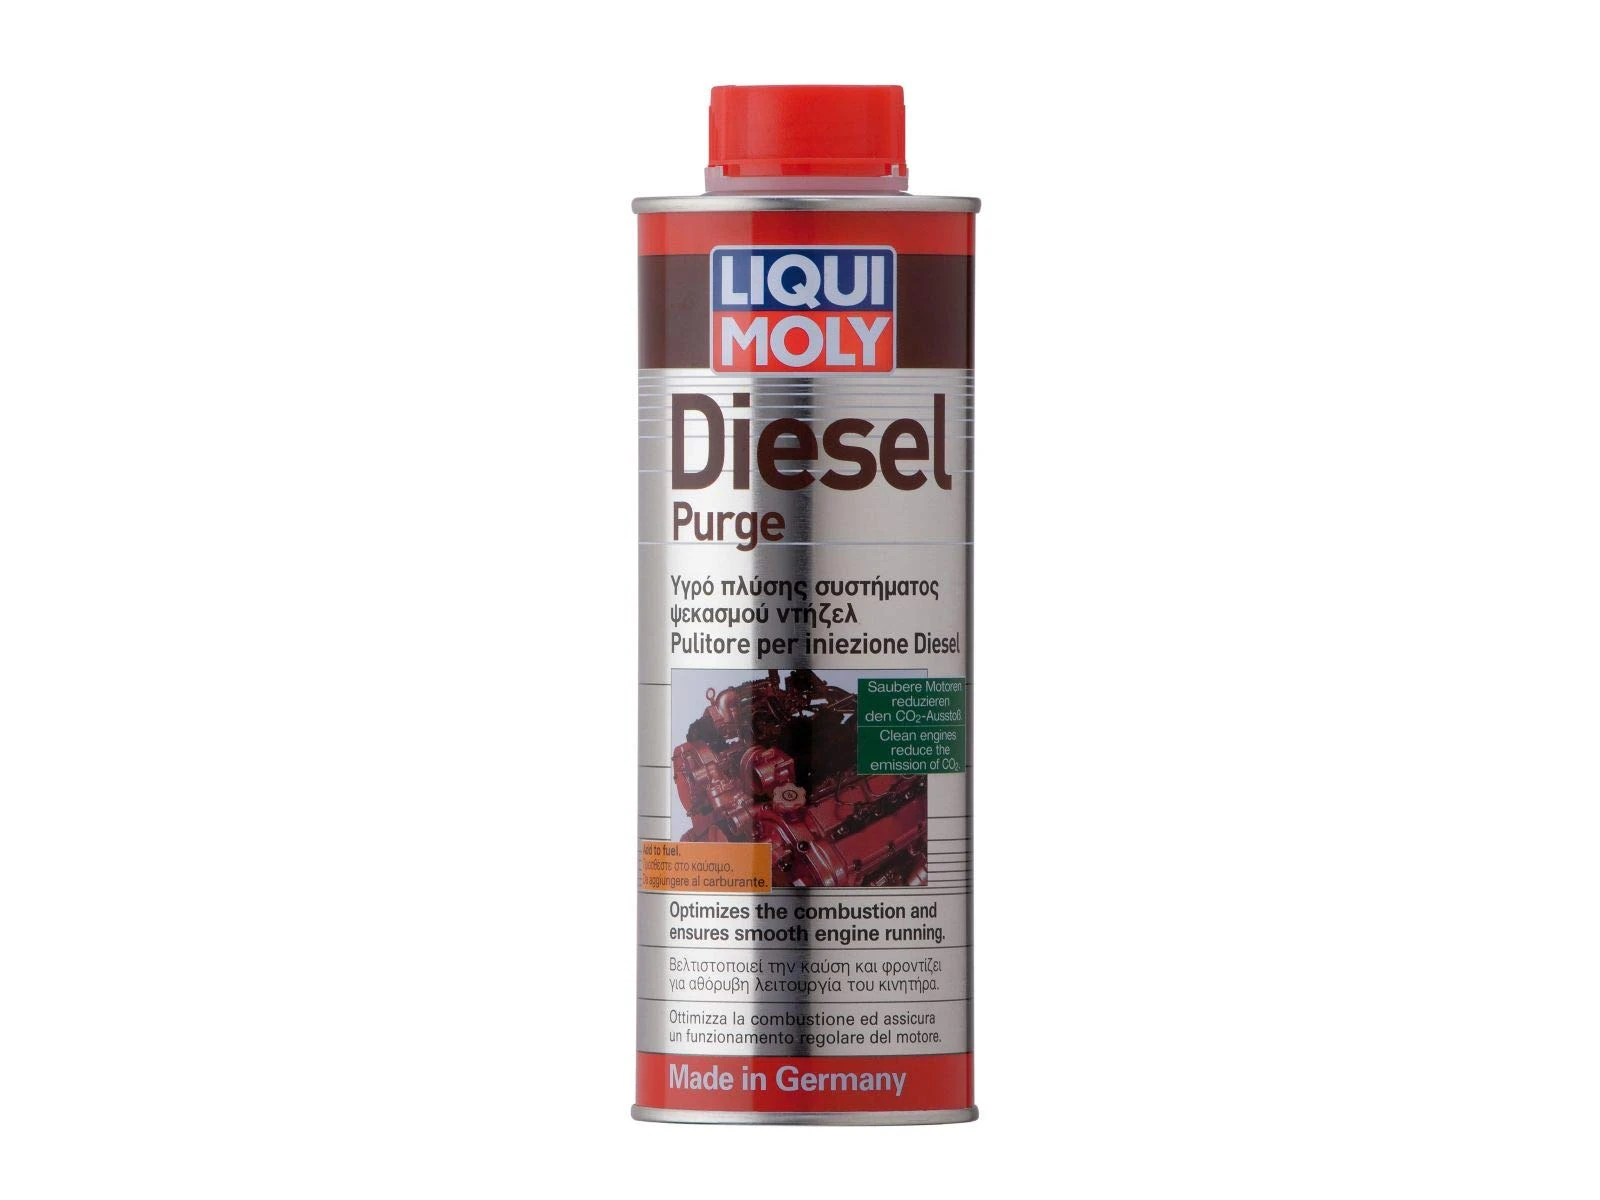 Diesel Purge (500ml): Liqui Moly 1811 -compatibility, features